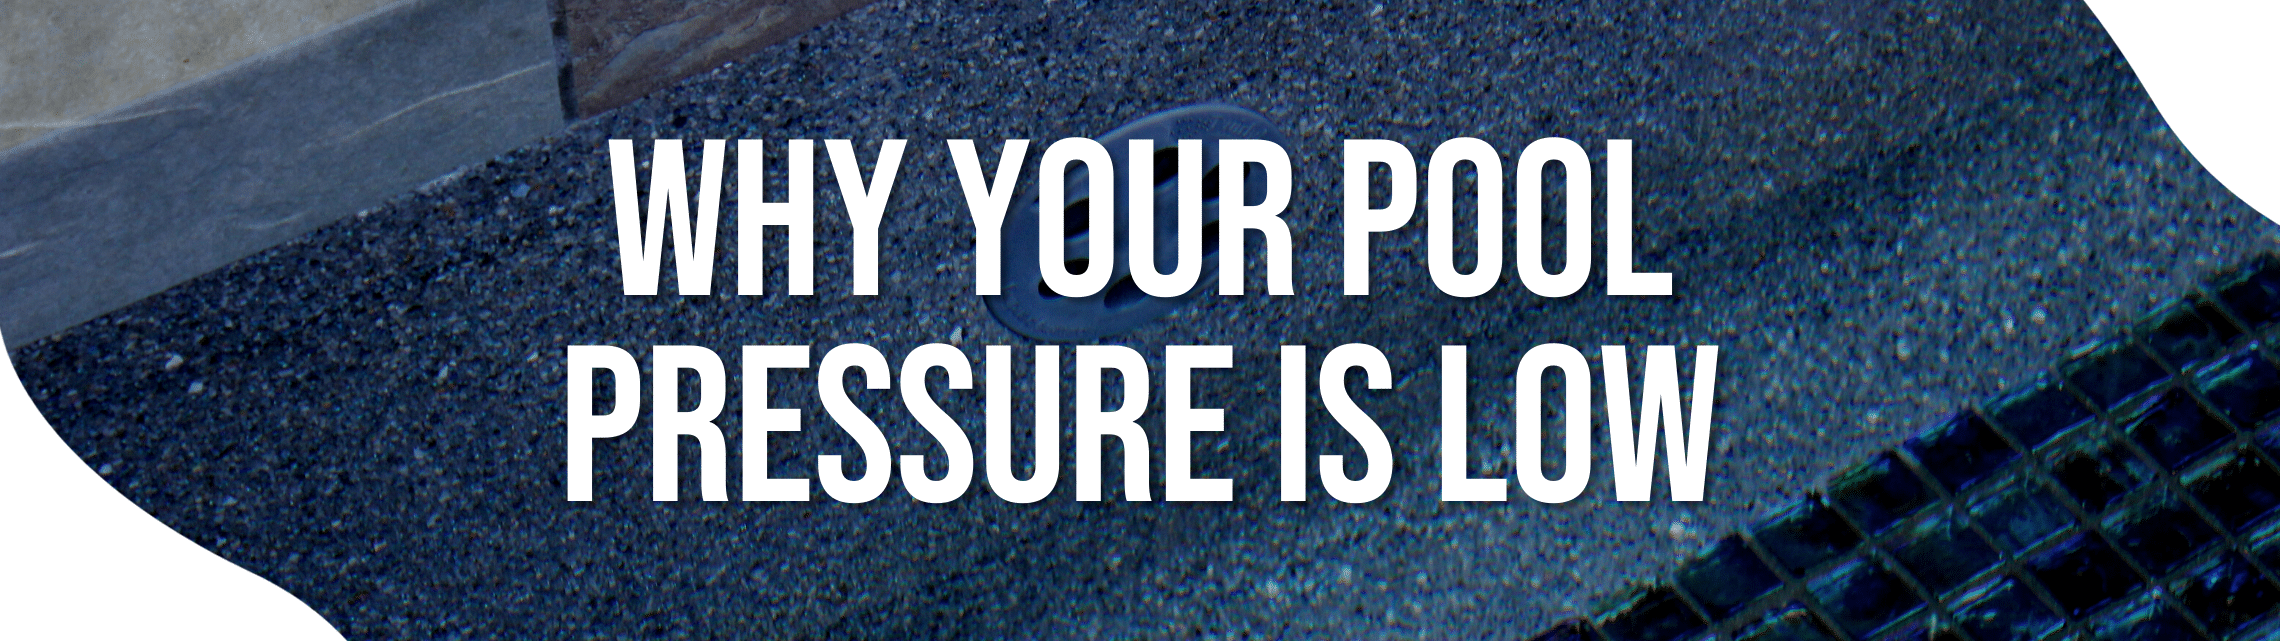 Why Your Pool Pressure is Low